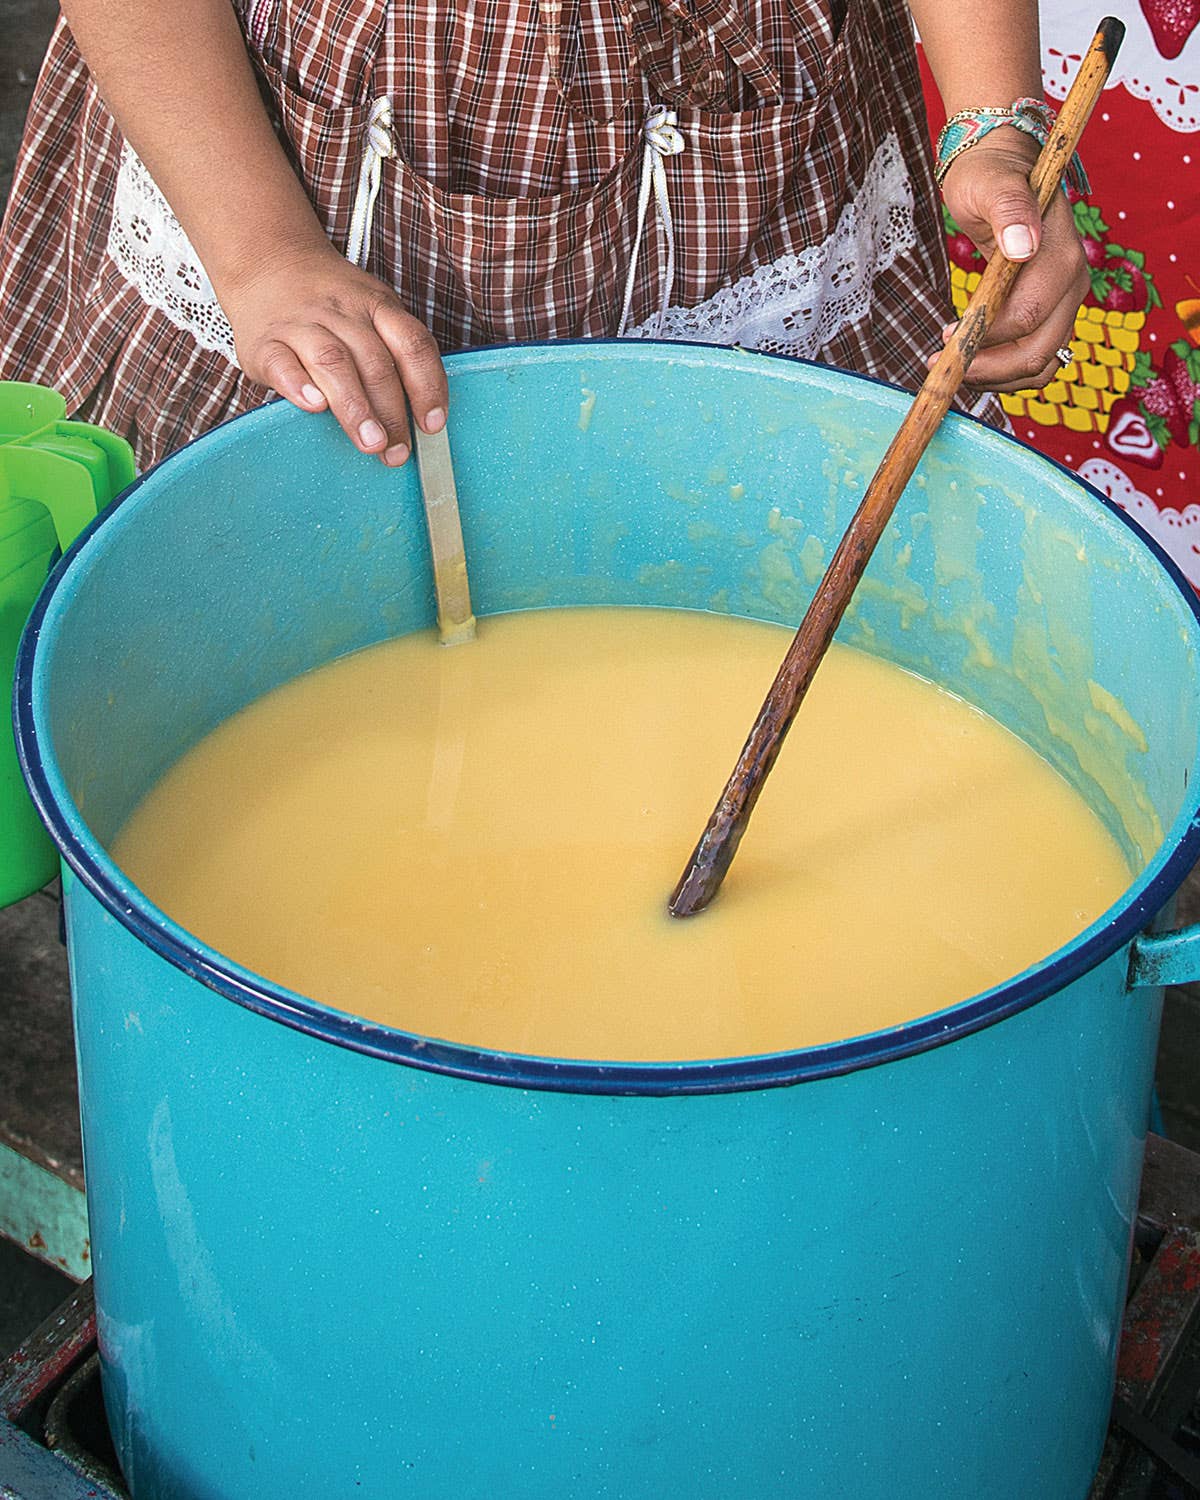 Guatemalan Atol is the Creamy Corn Smoothie of Your Dreams